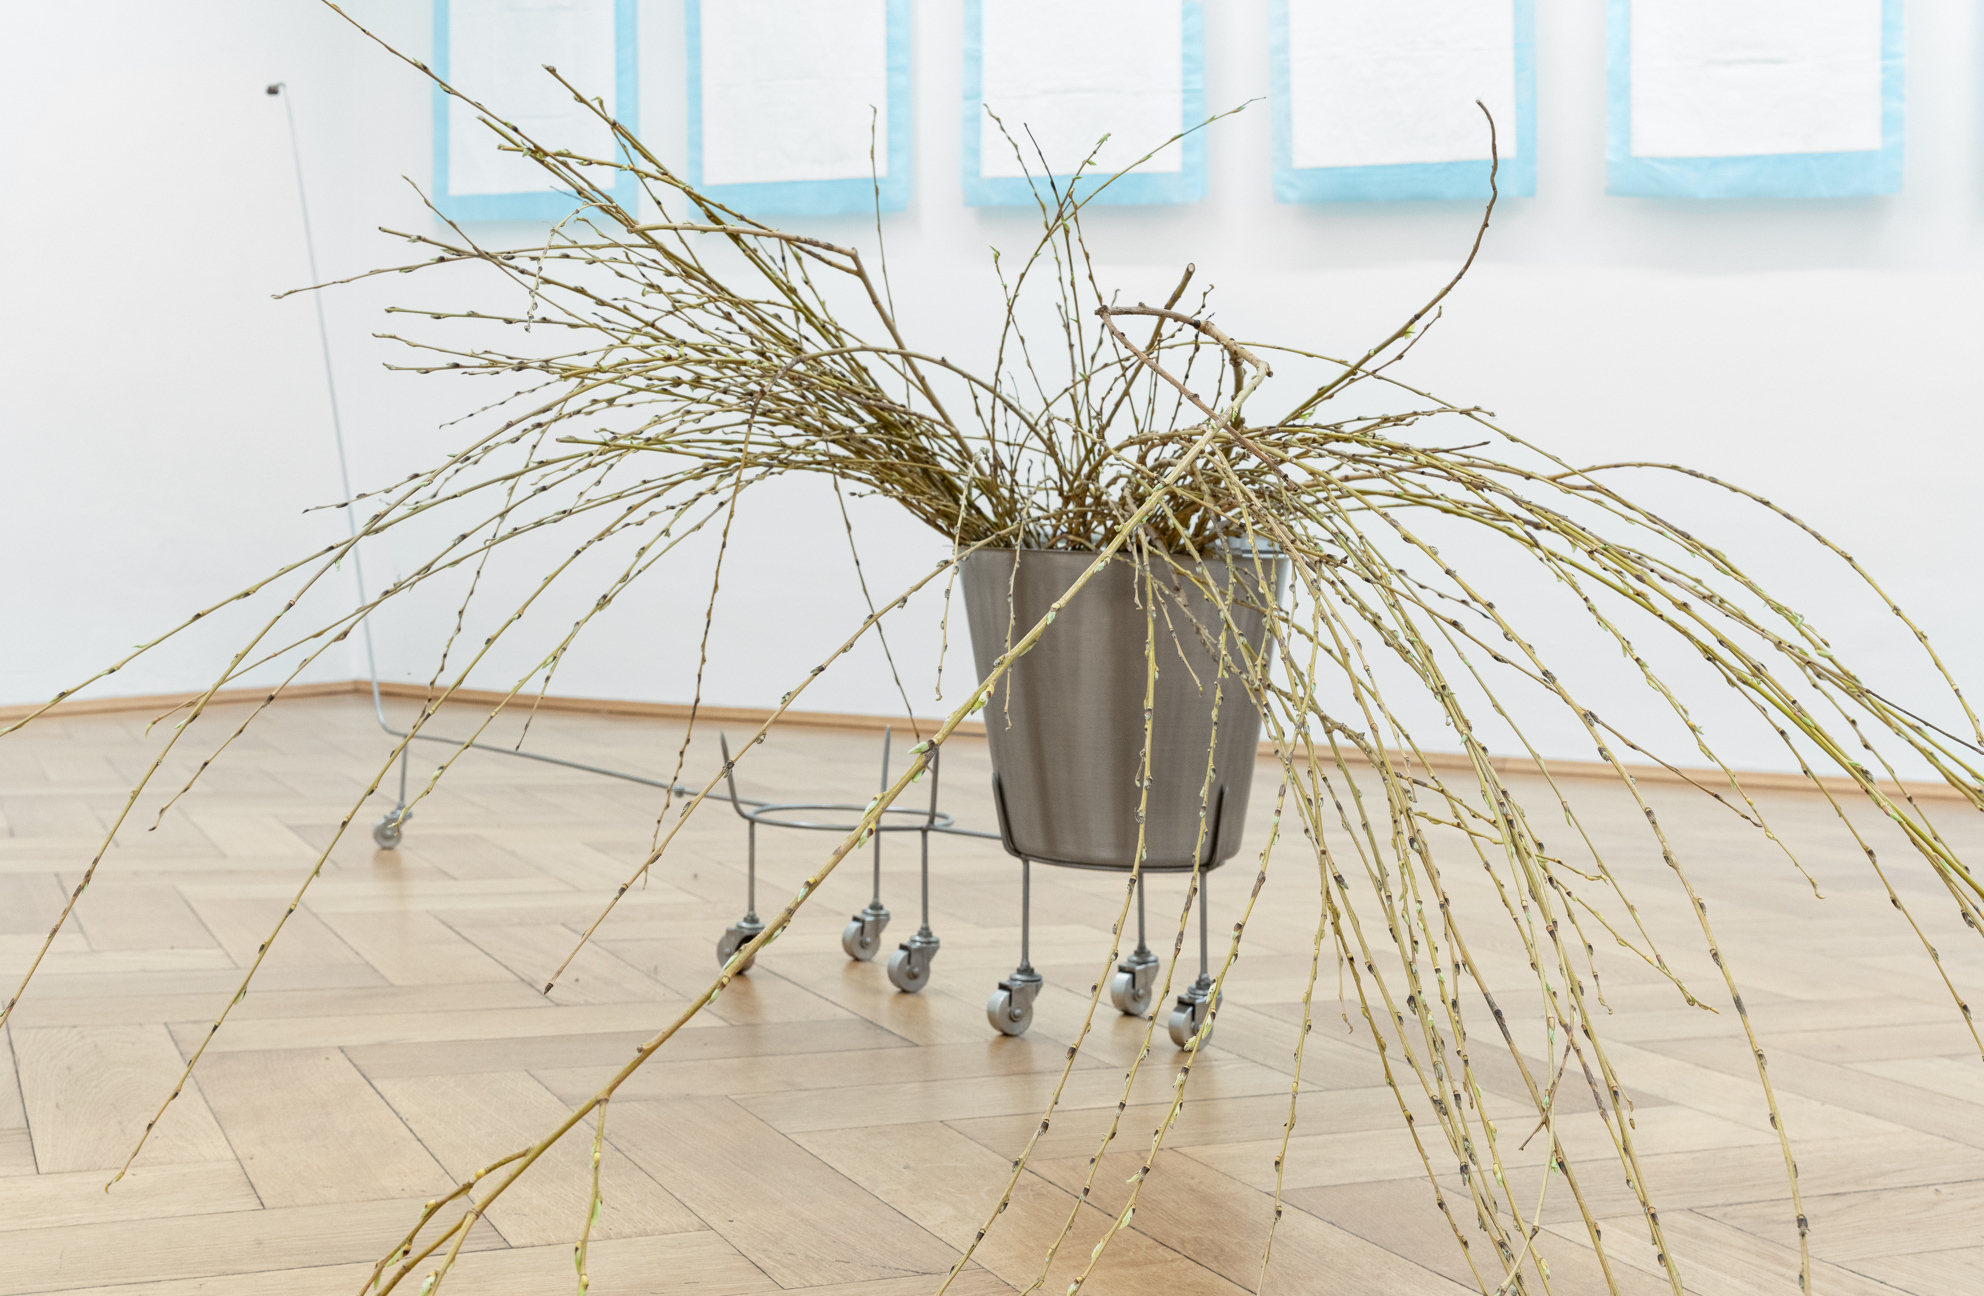 Laura Ní Fhlaibhín, "all the willows whisper their wishes for you", 2023, stainless steel trolley, bronze amulet cast from great aunt Bridie’s gift, stainless steel buckets, stainless steel swivel wheels, willow shoots, 200 x 100 cm